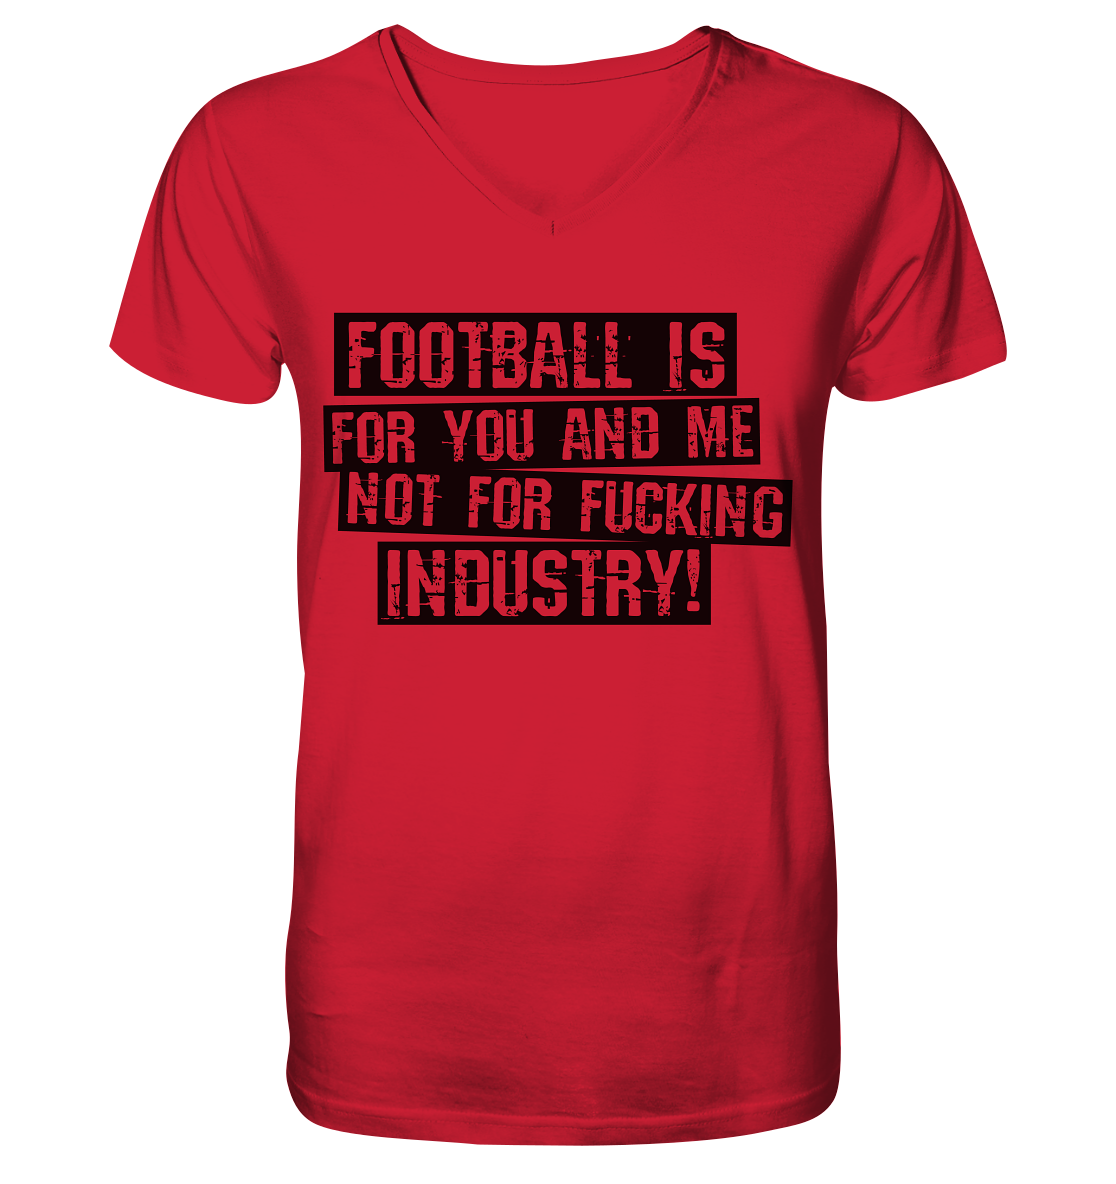 BLOCK.FC Fanblock Shirt "FOOTBALL IS FOR YOU AND ME NOT FOR FUCKING INDUSTRY!" Männer Organic V-Neck T-Shirt rot